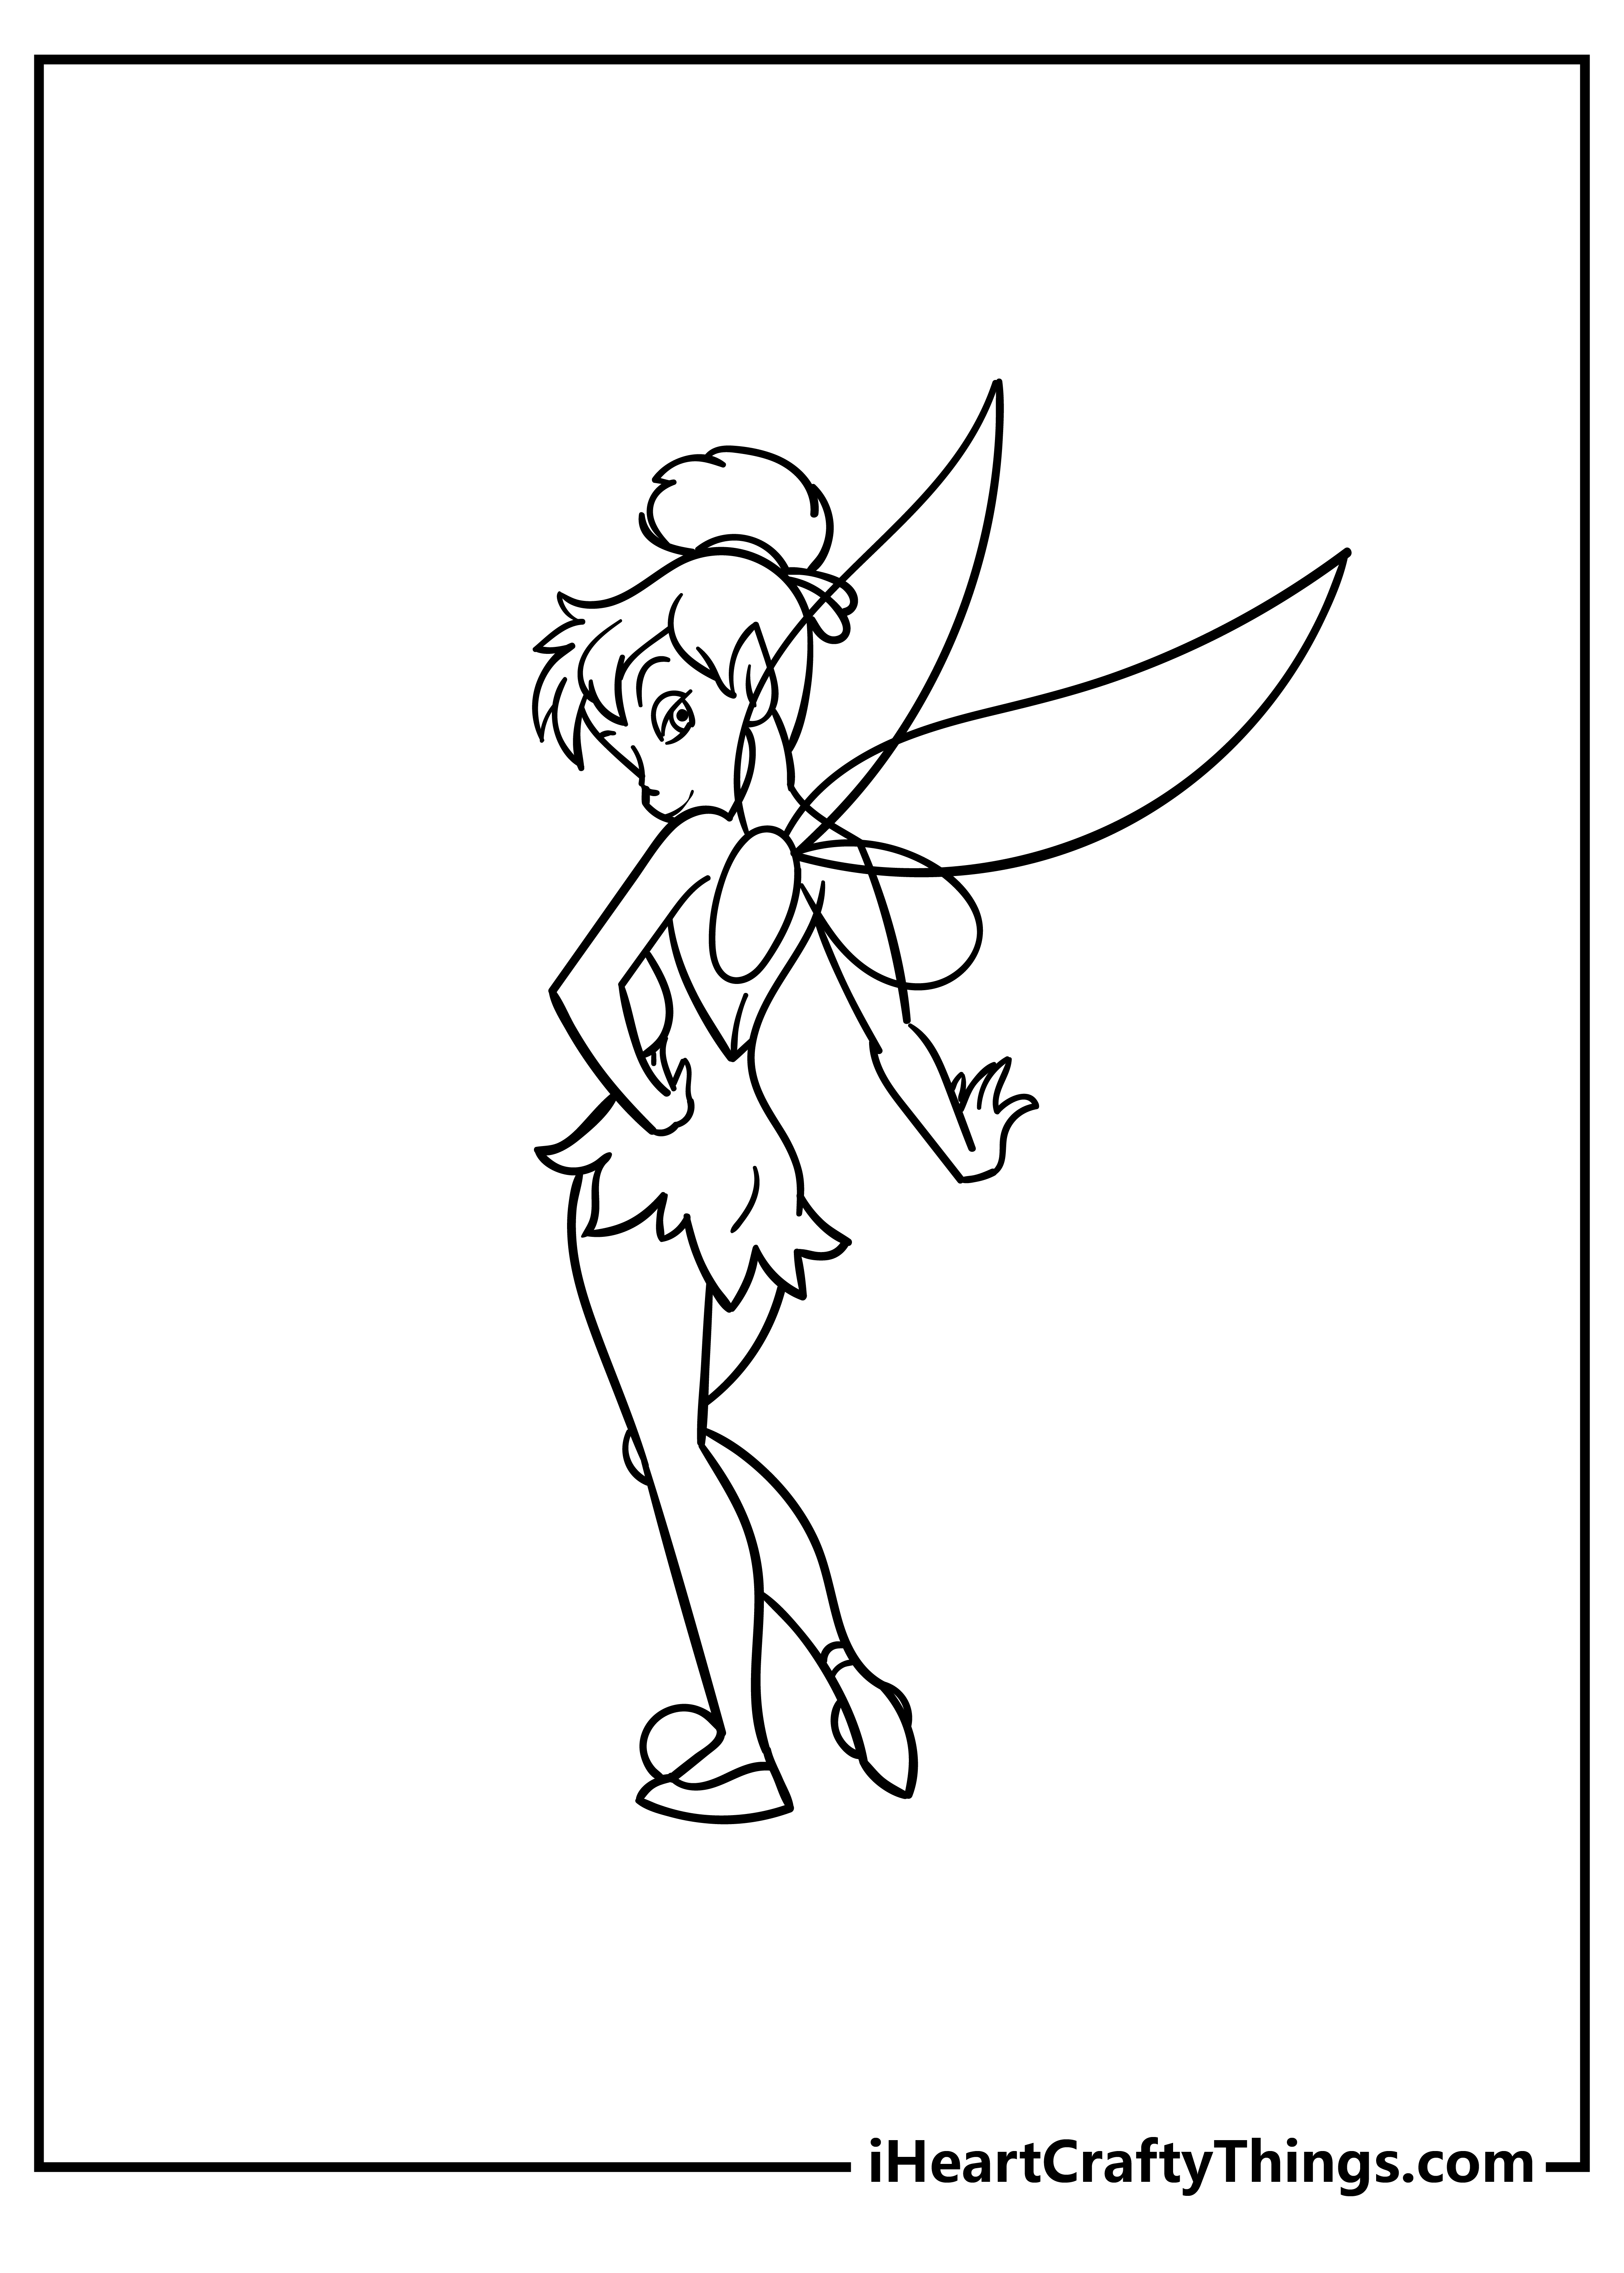 Tinkerbell Coloring Book for kids free printable